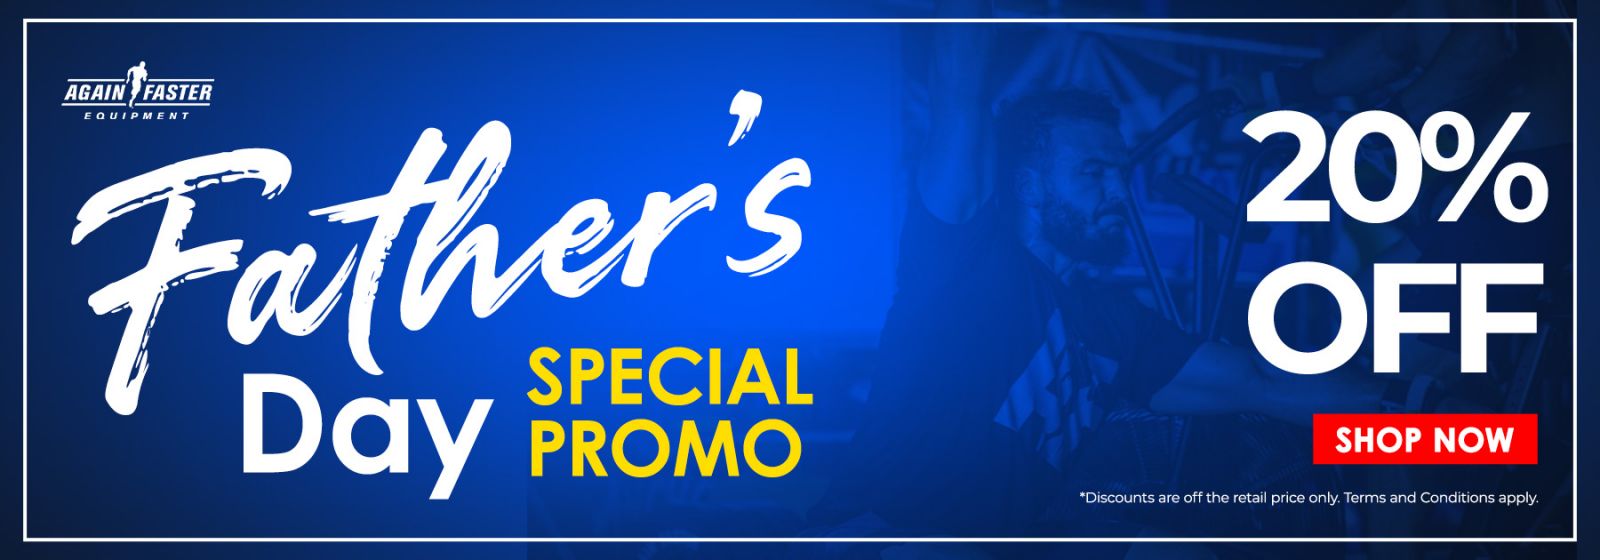 Father's Day Special Promo Banner